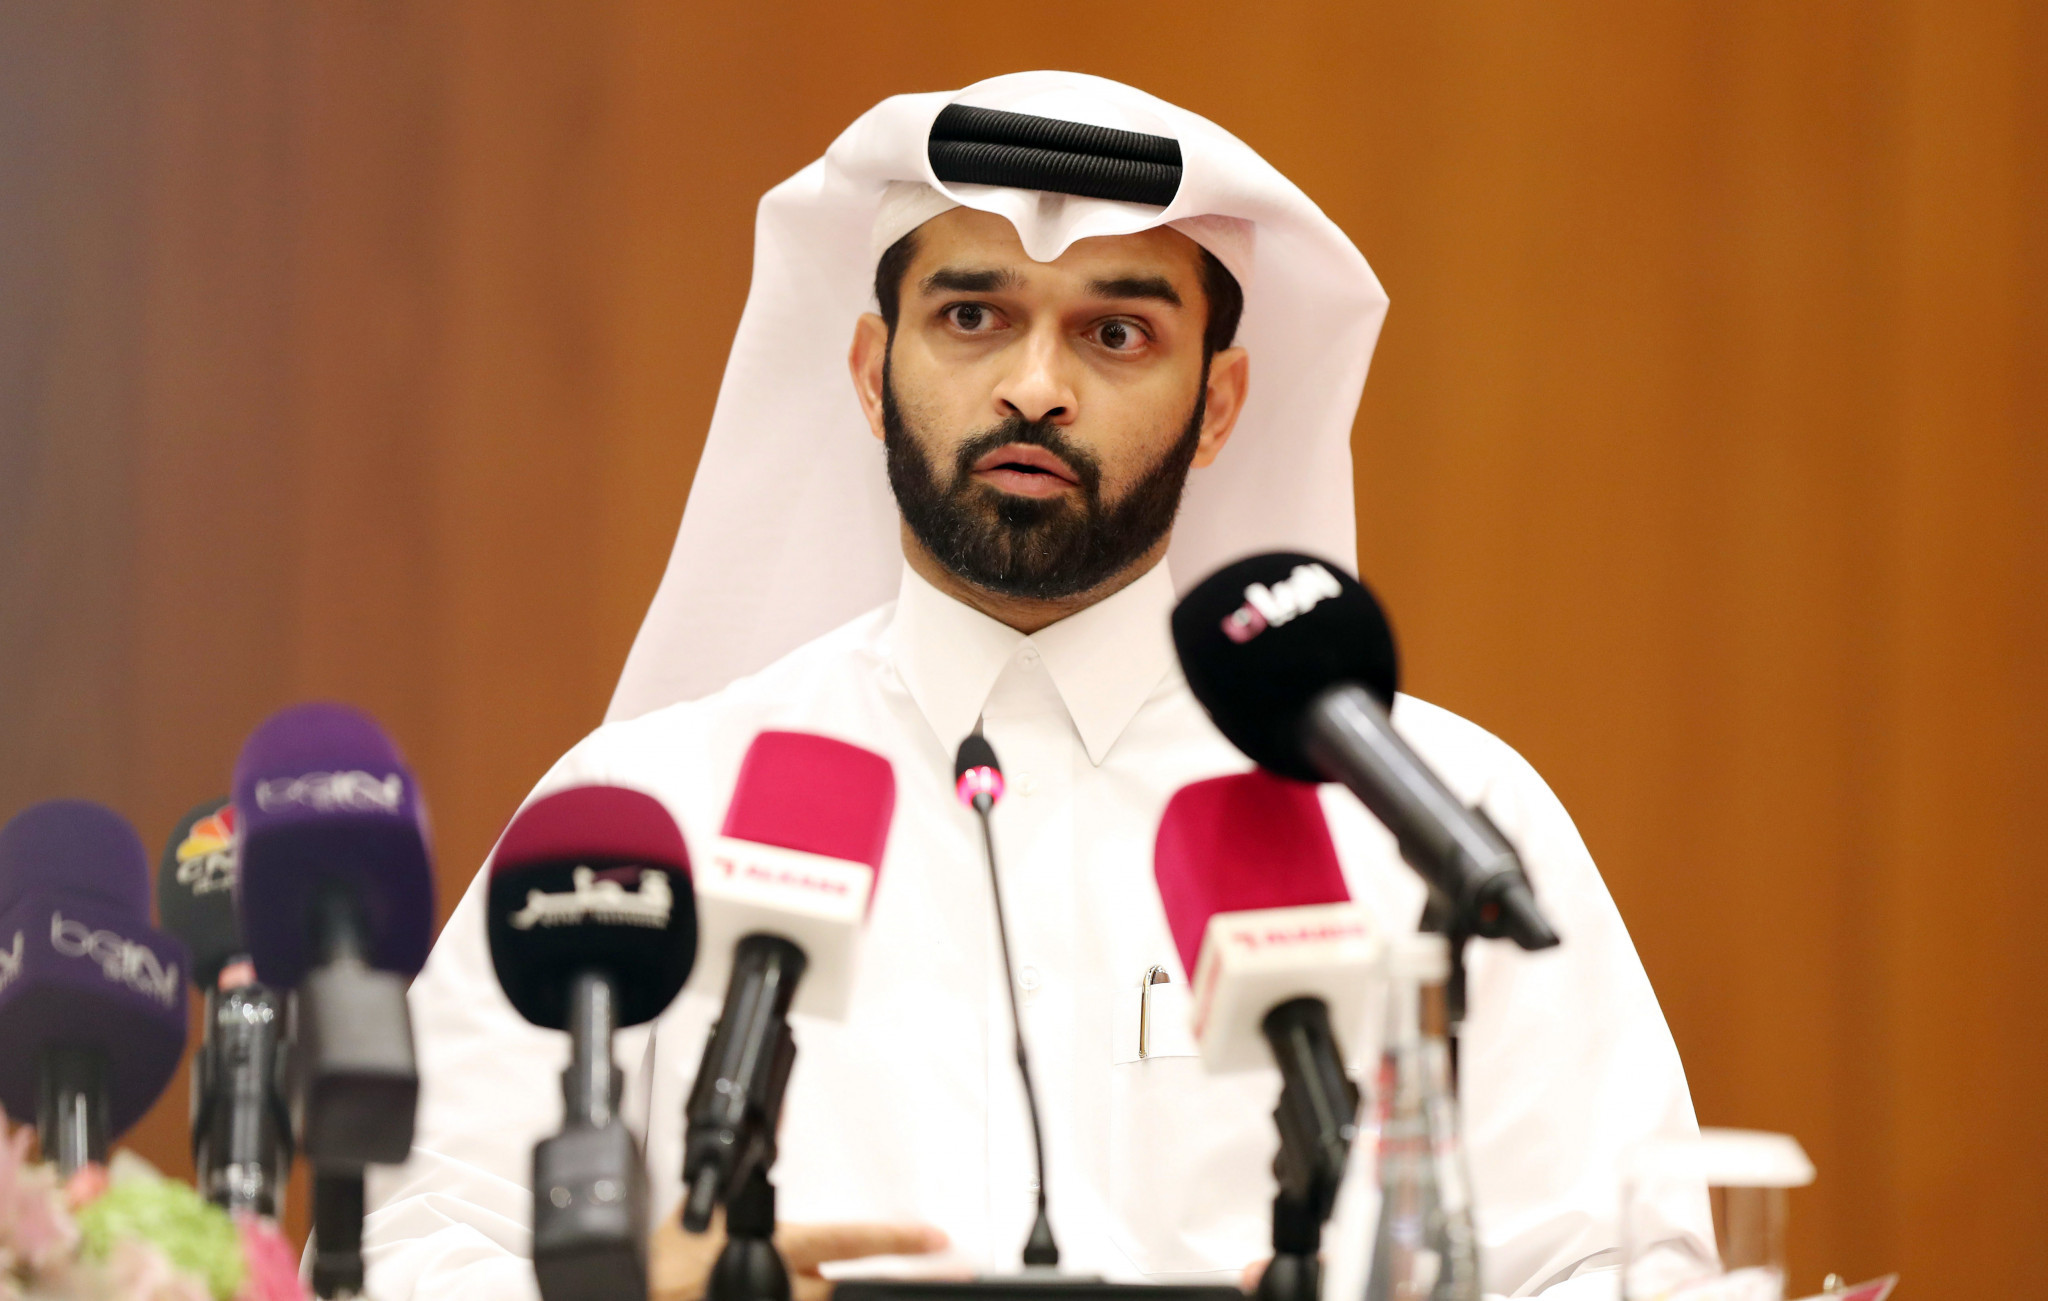 Hassan al-Thawadi of the Supreme Committee for Delivery and Legacy insisted 